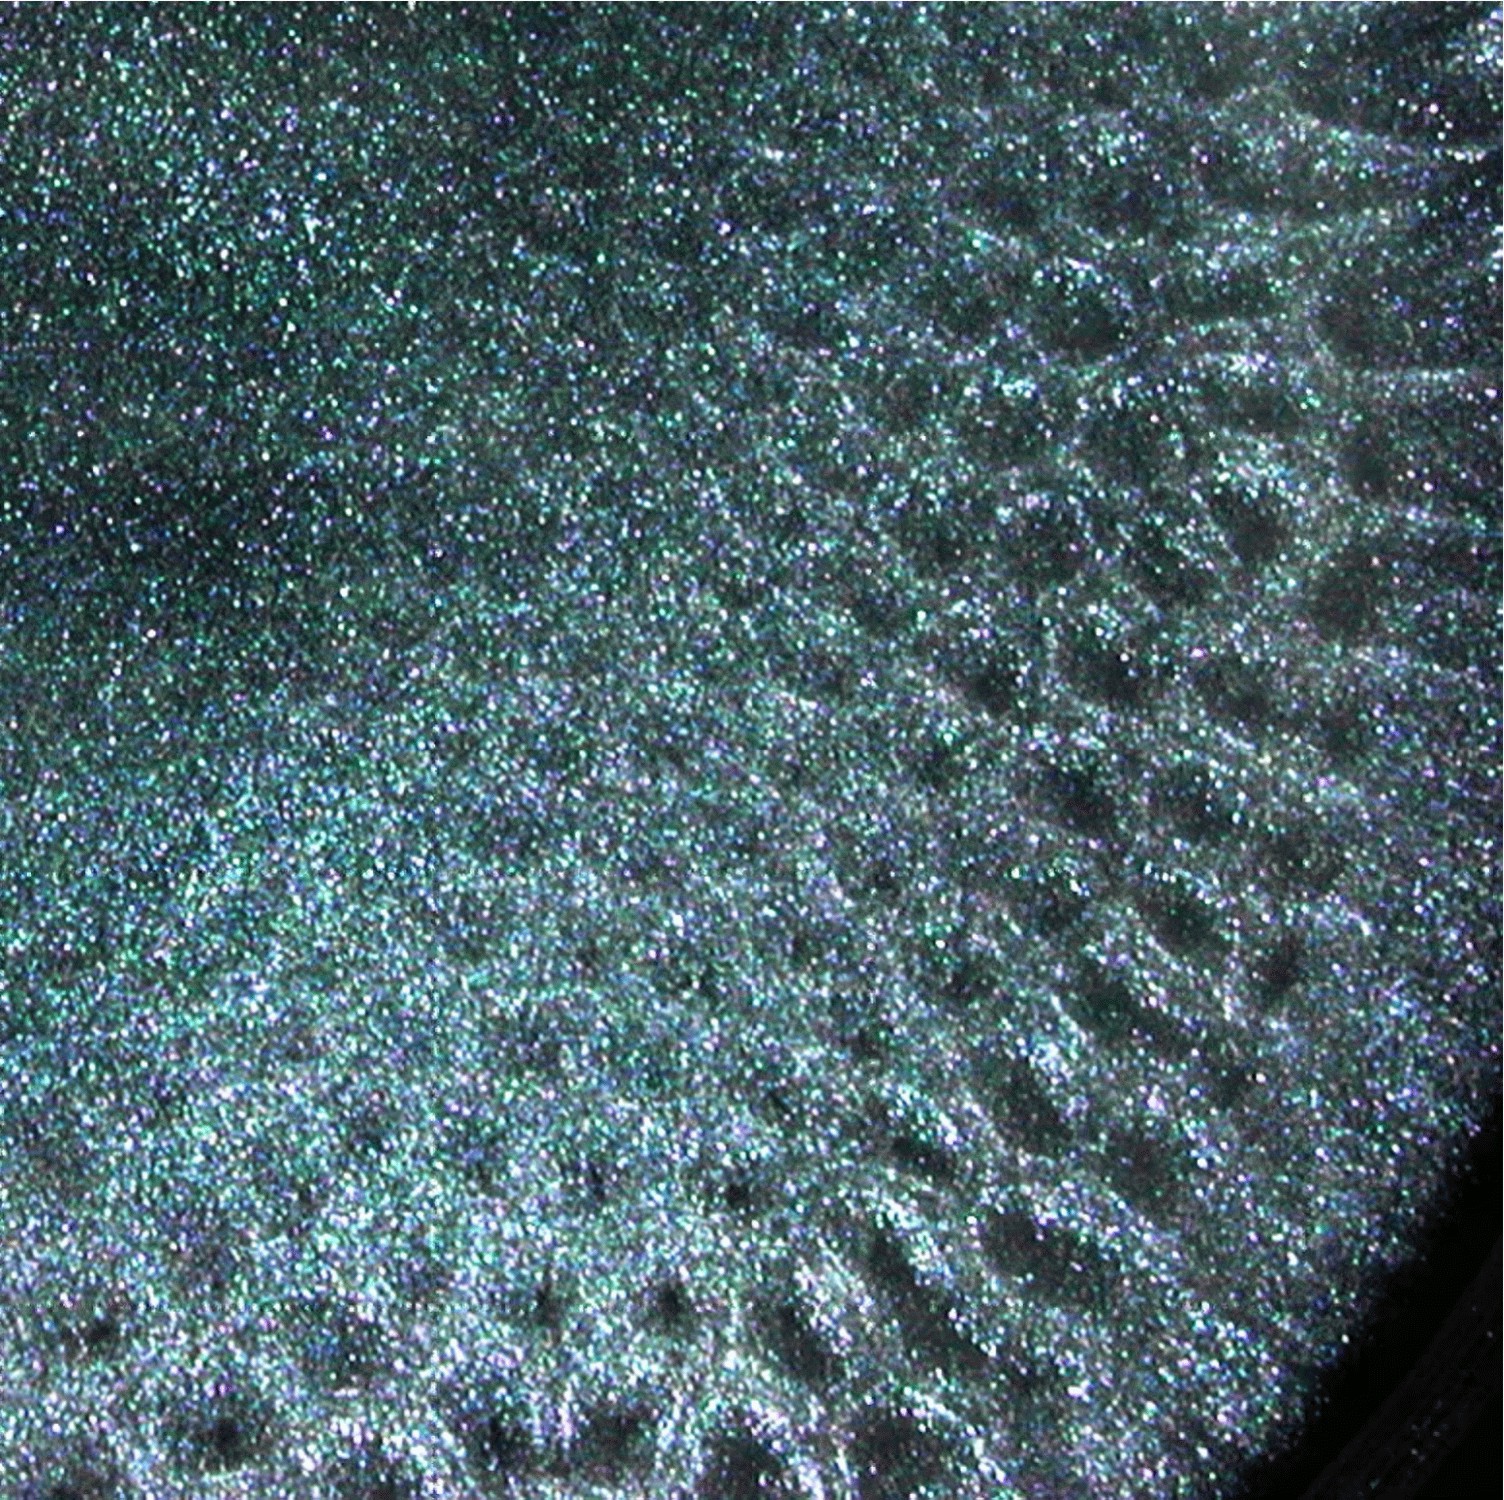 Image
of convection cells formed in silicone oil